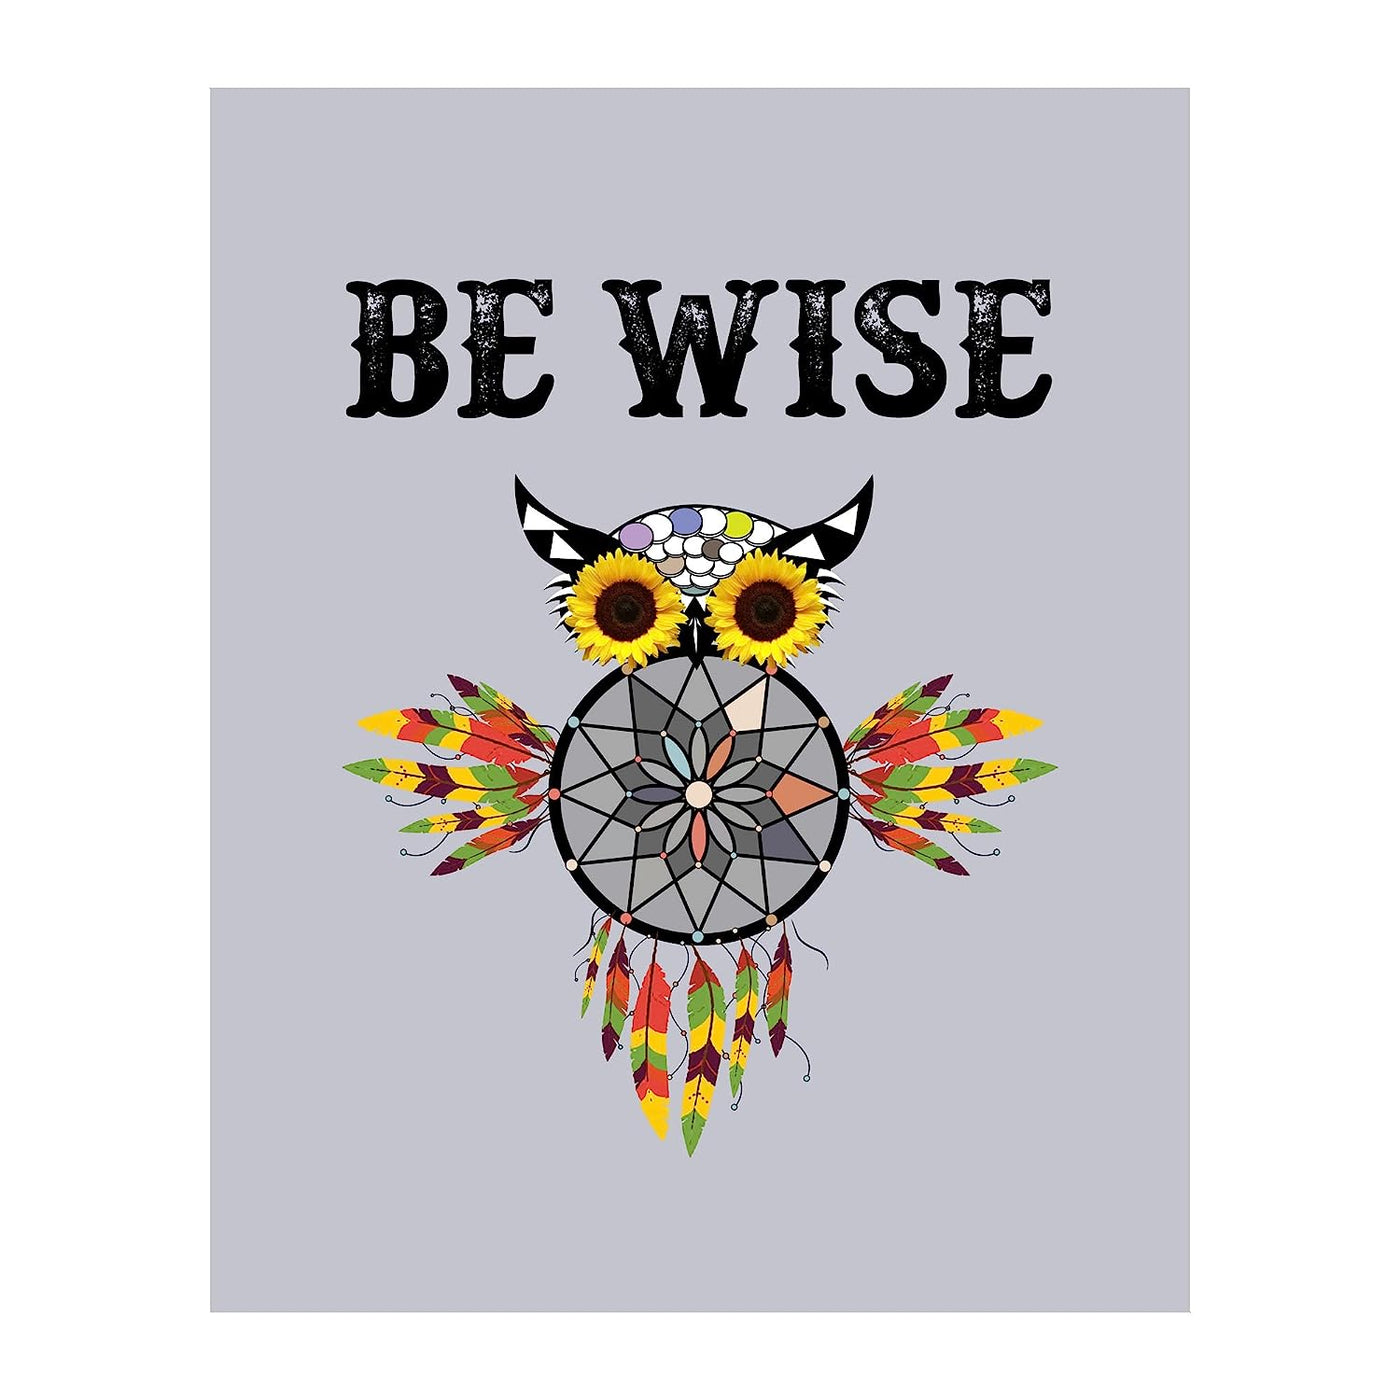 ?Be Wise?-Motivational Quotes Wall Art -8 x 10" Modern Poster Print with Owl Shaped Dream Catcher Image-Ready to Frame. Spiritual Decor for Home-Bedroom-Office-Studio Decor. Great Inspirational Gift!